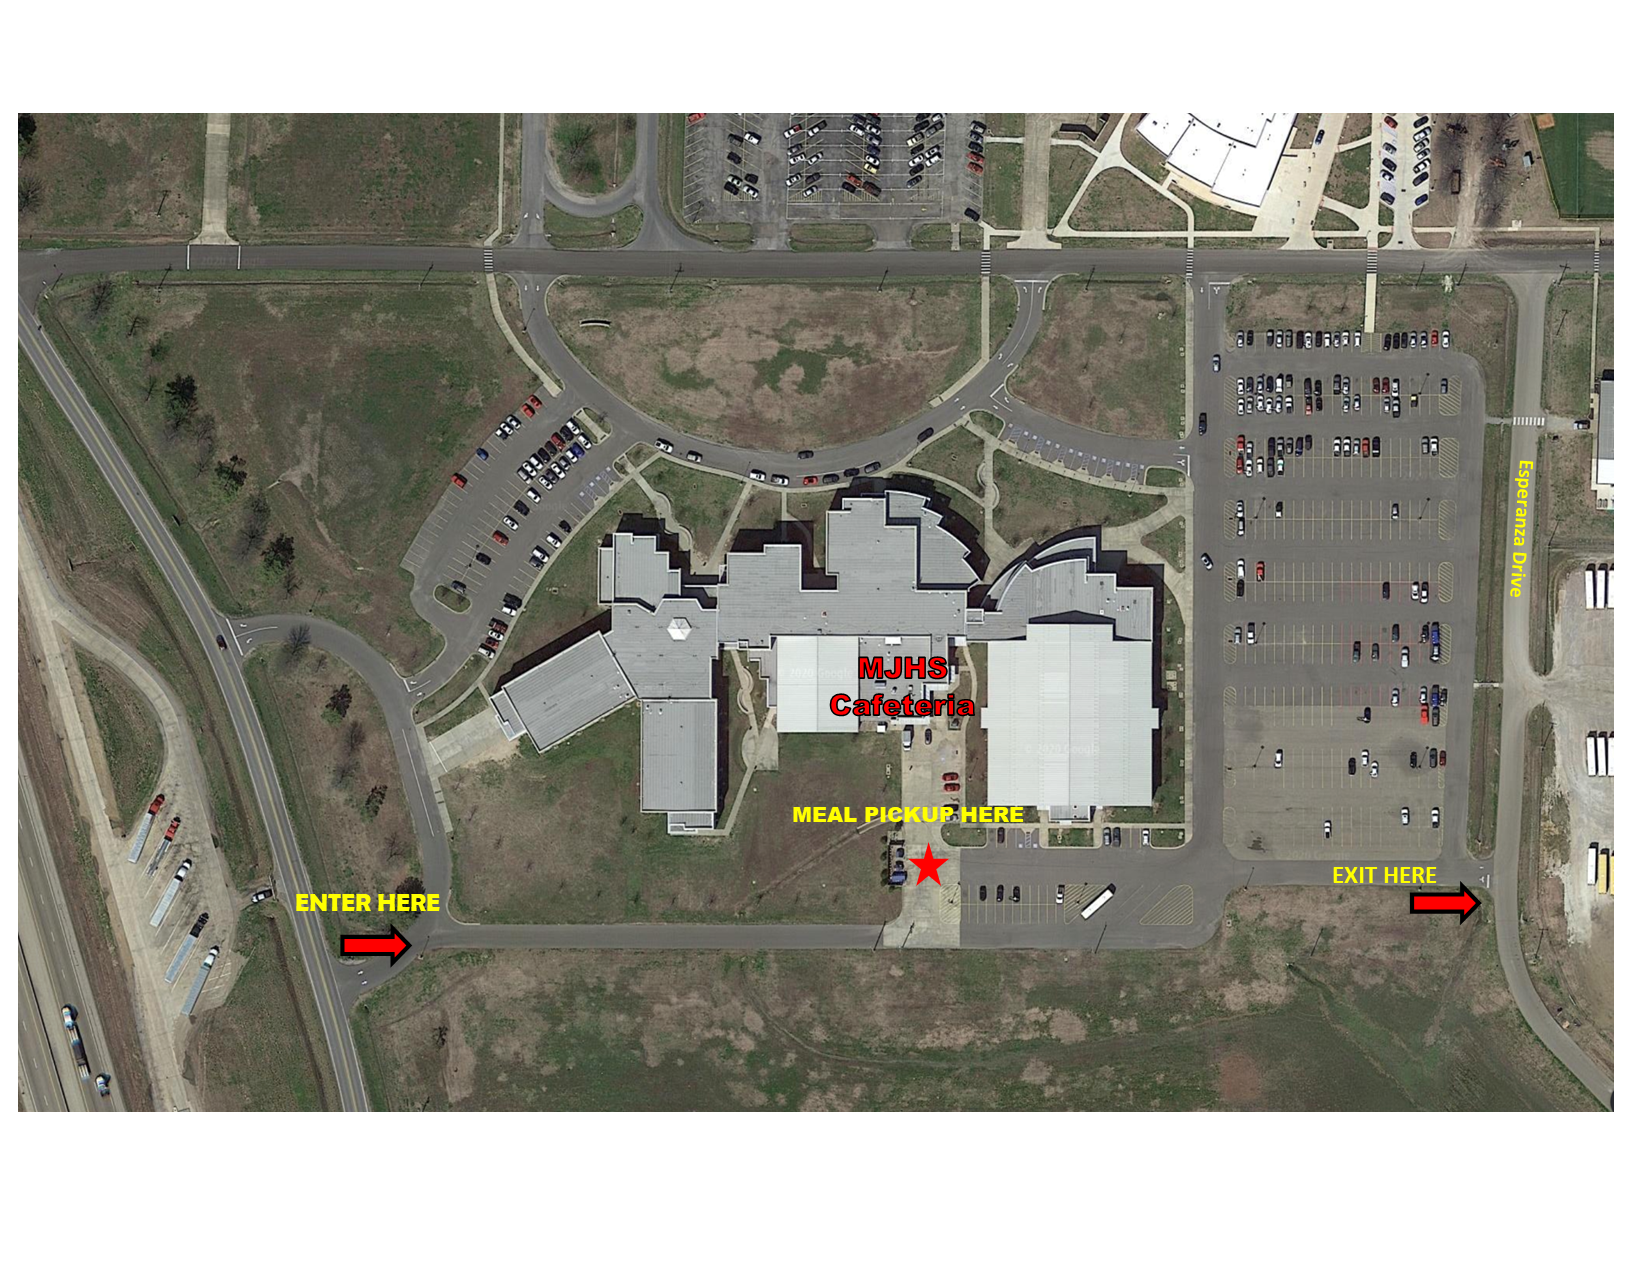 VIRTUAL LEARNING STUDENT MEAL PICKUP MAP FOR THE MJHS LOCATION